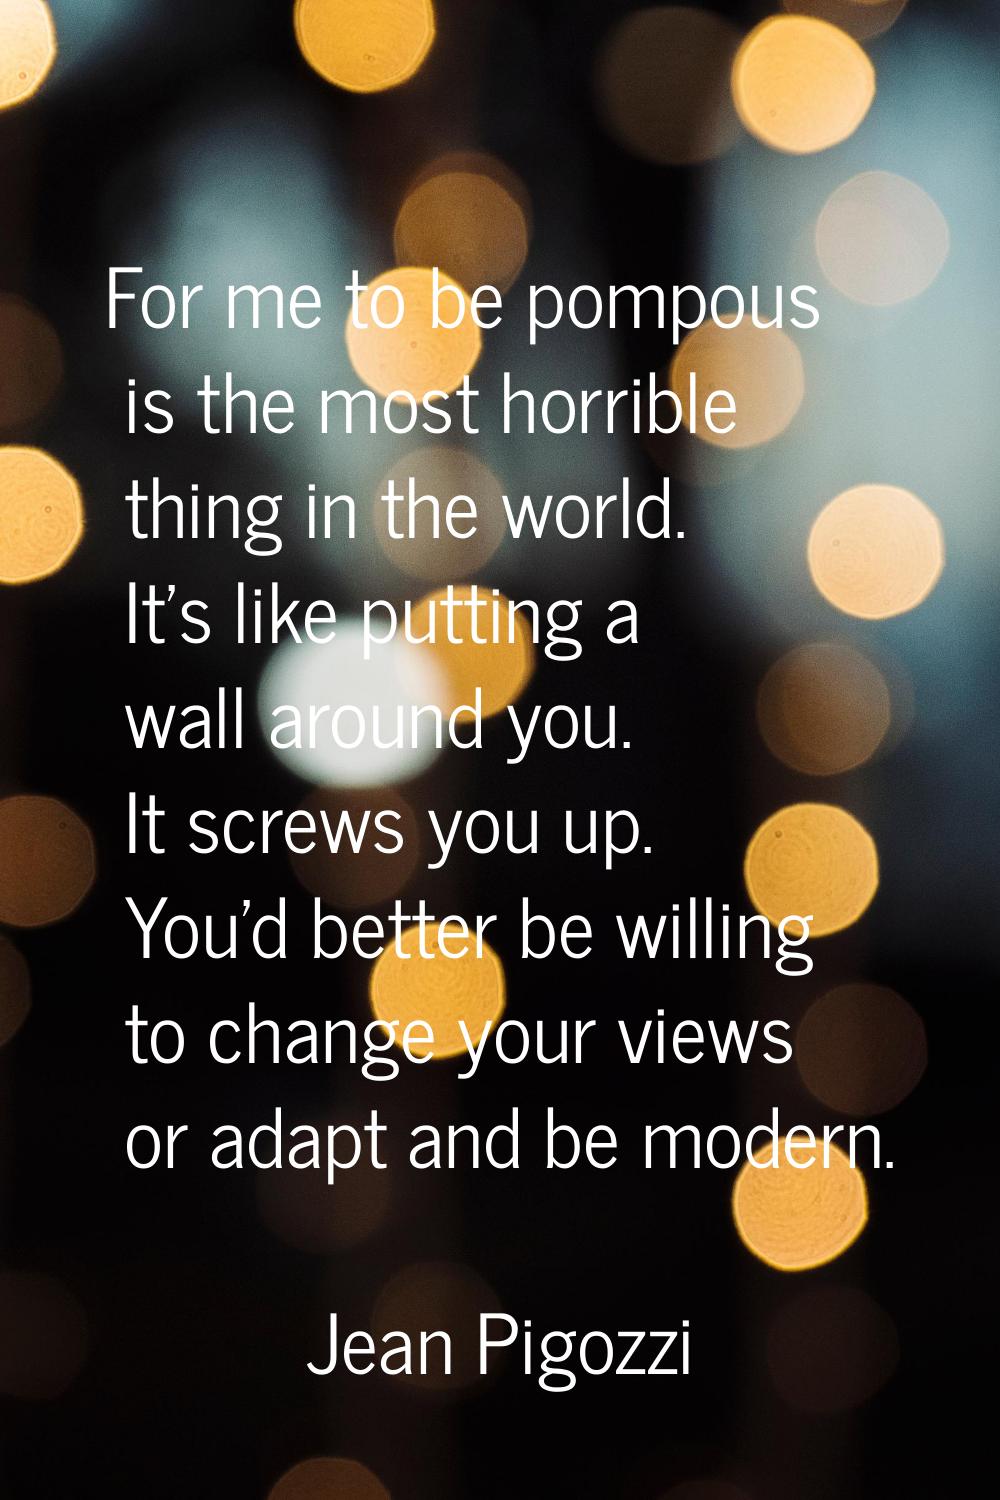 For me to be pompous is the most horrible thing in the world. It's like putting a wall around you. 